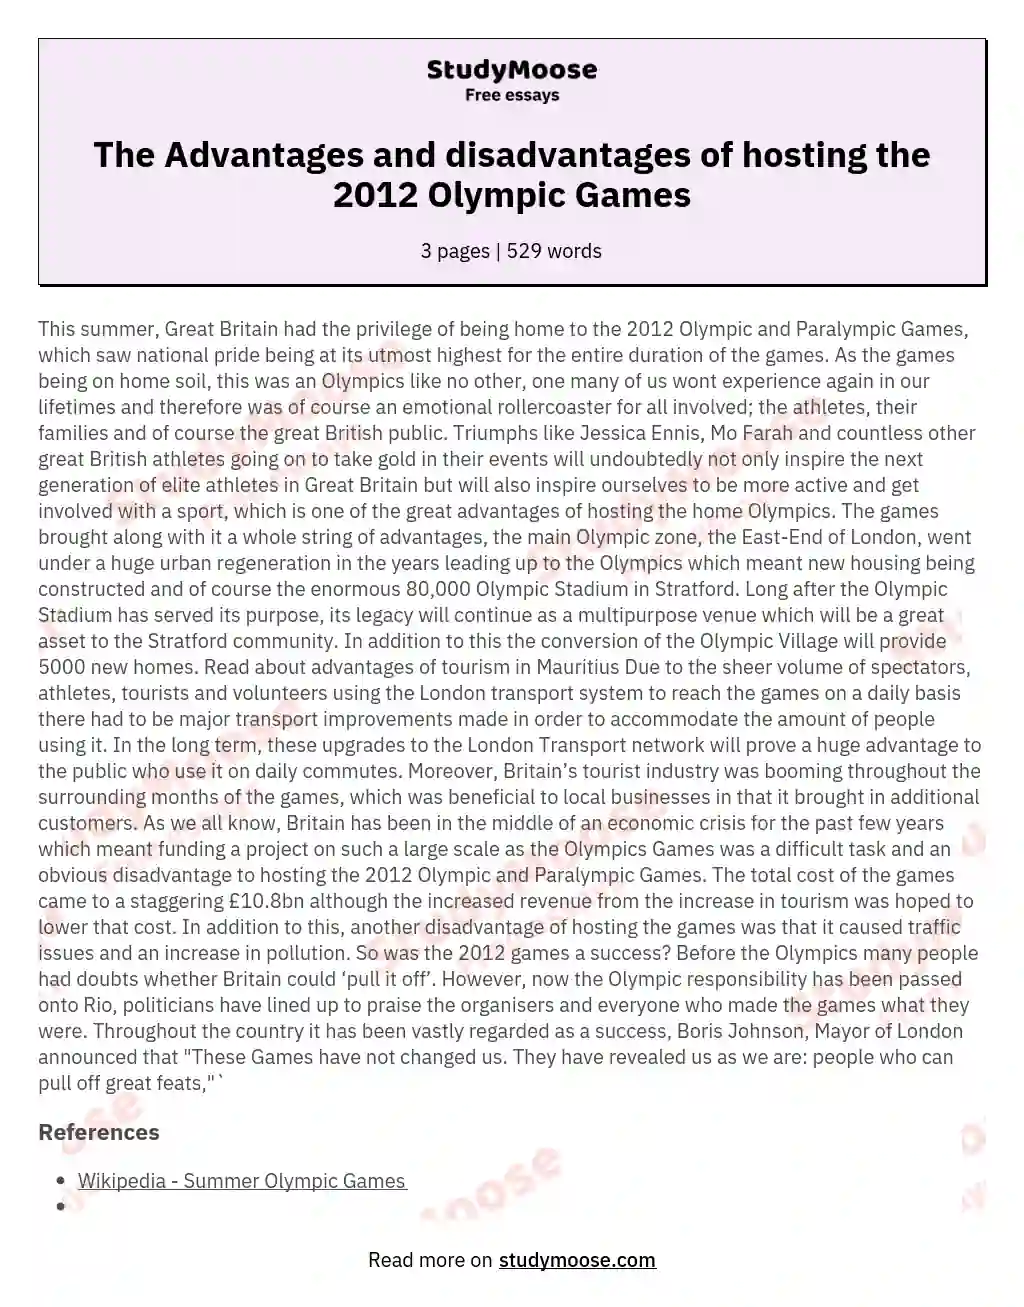 The Advantages and disadvantages of hosting the 2012 Olympic Games essay